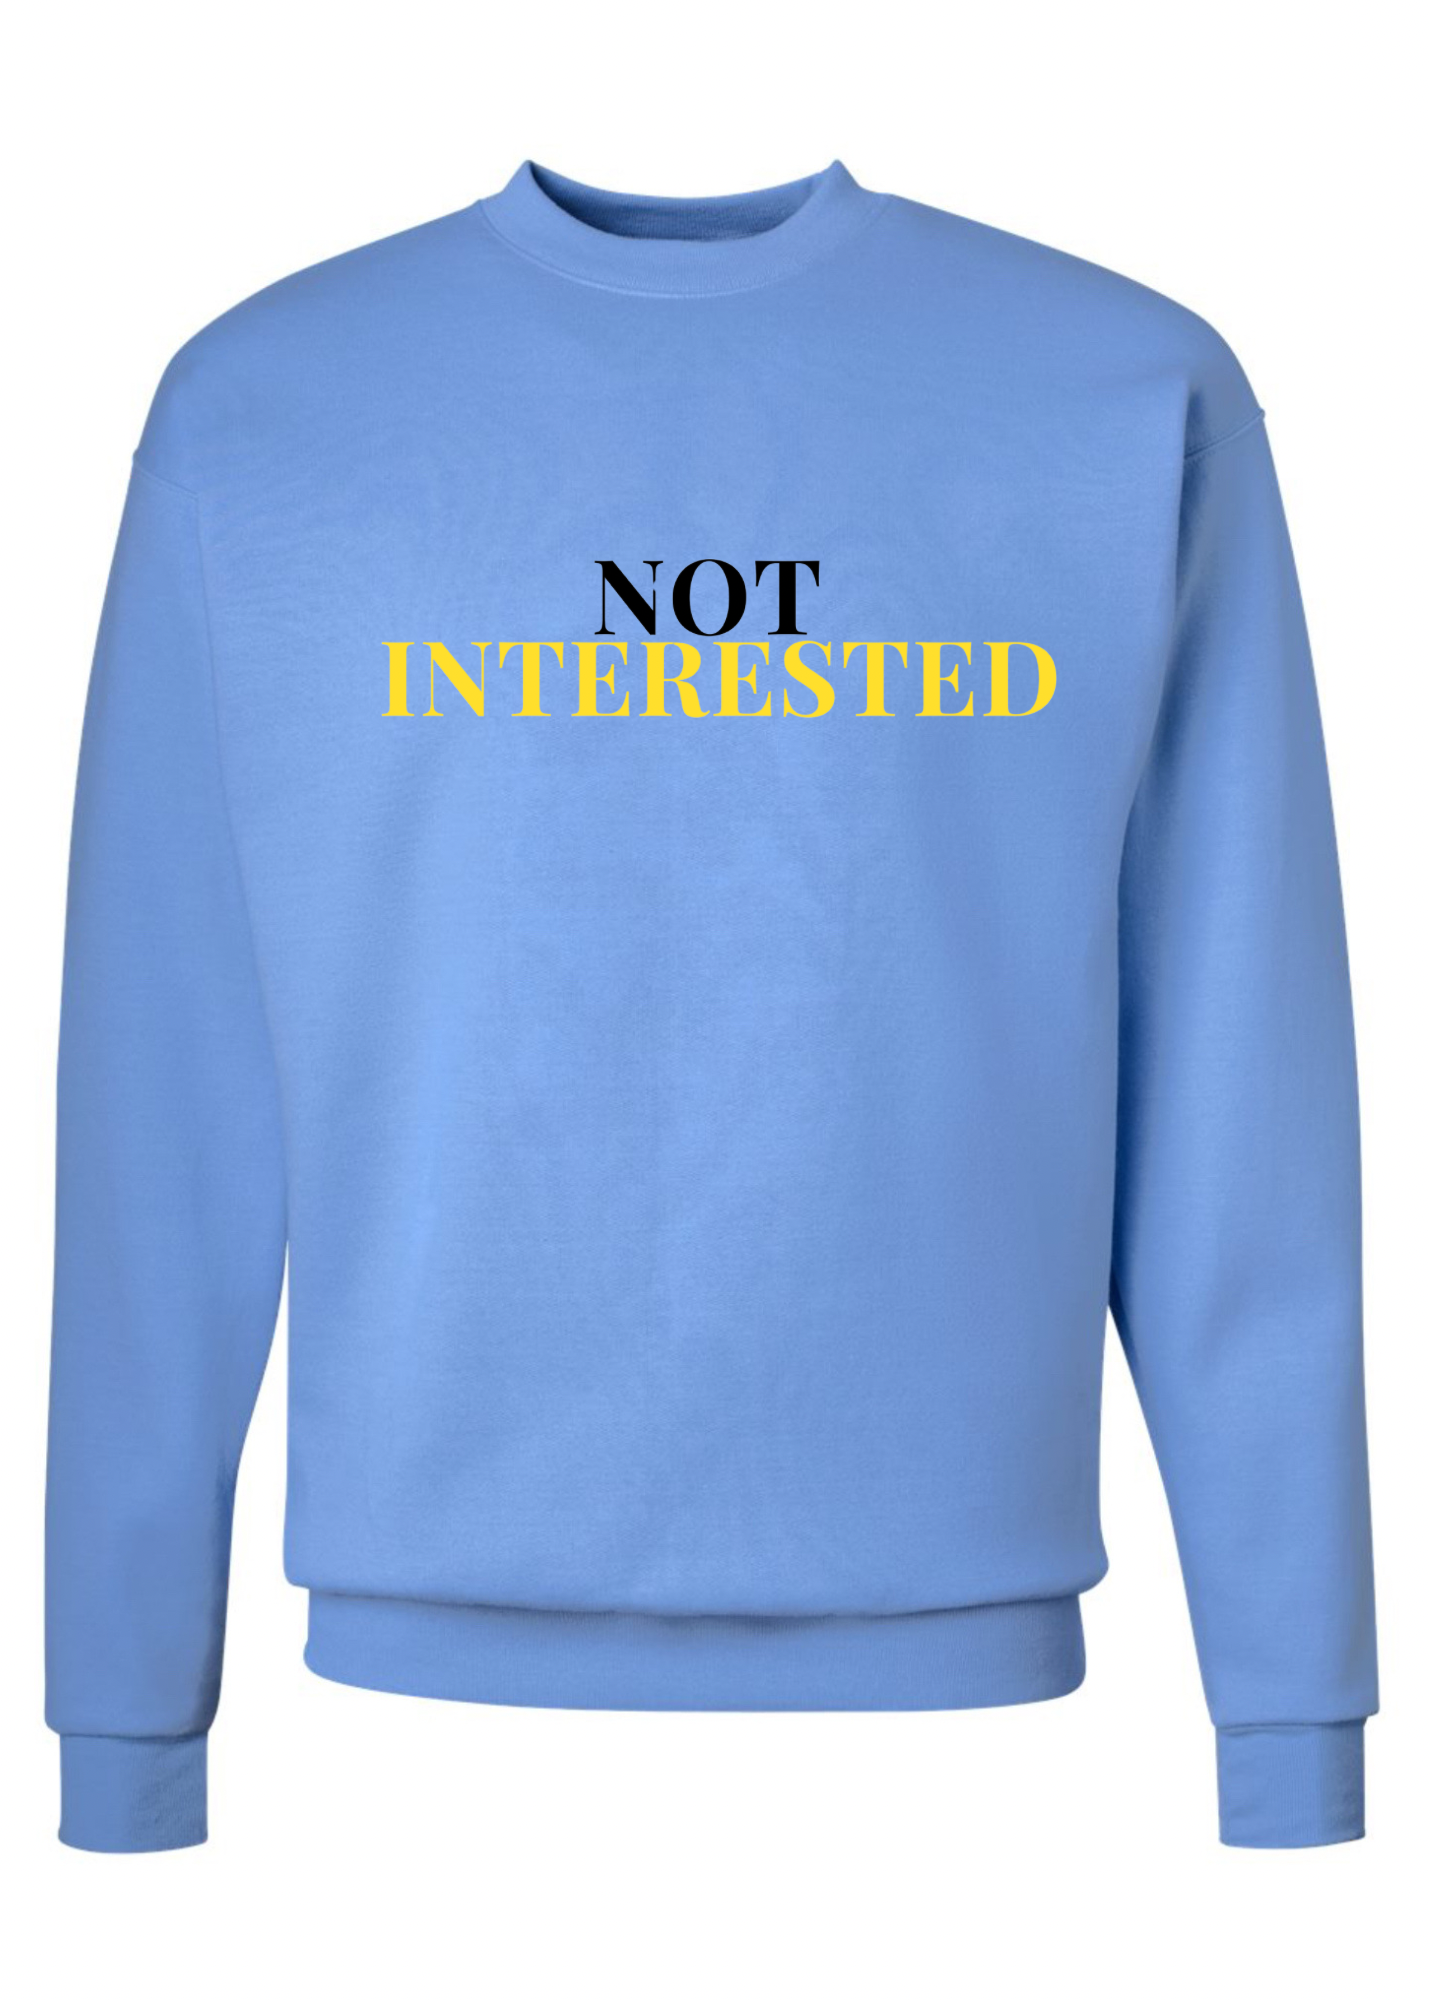 Not Interested Crew Sweatshirt  - 3 colors available